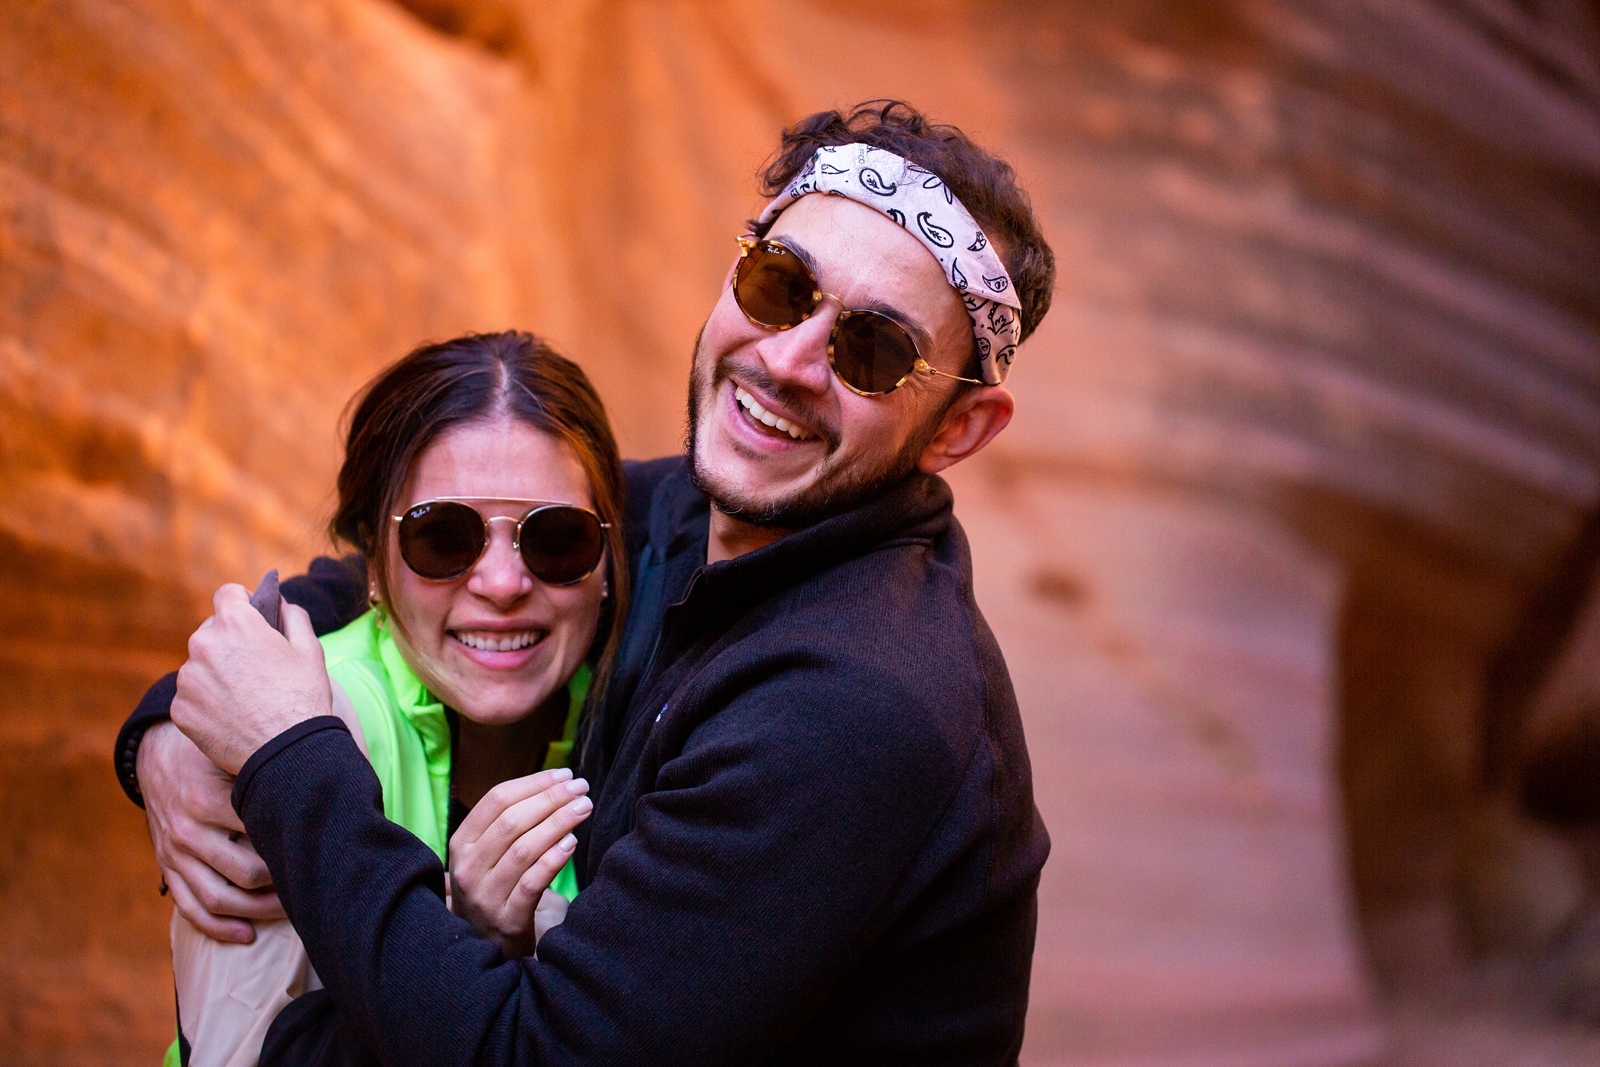 a newly engaged couple embracing after their surprise proposal in the Utah slot canyon during the adventurous hike